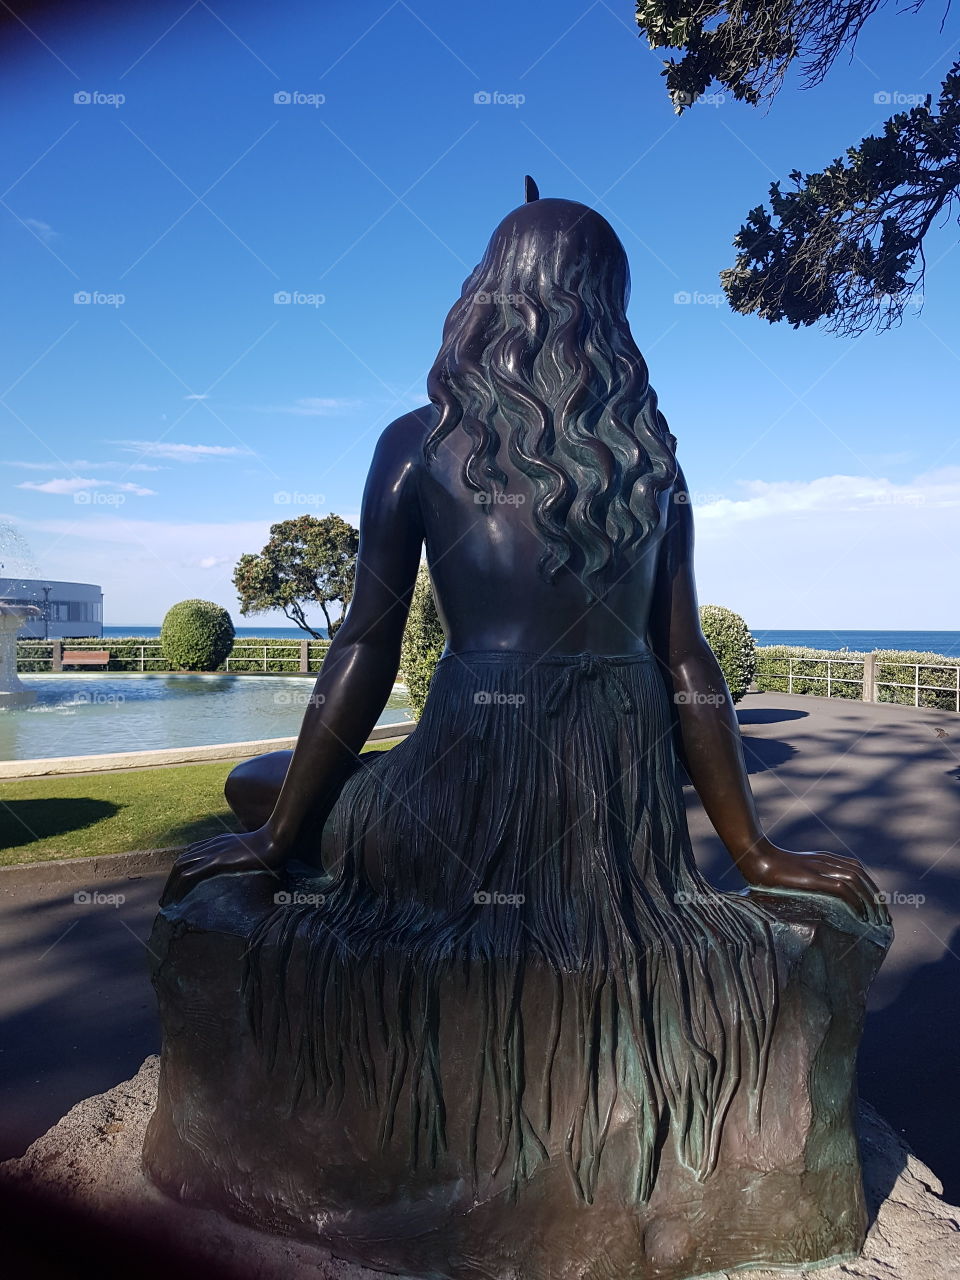 Pania of the reef. A Maori legend of a woman(Google to learn about the story of Pania) Napier. New Zealand. She now sits as a bronze sculpture looking out into the bay. Thieves once stole the sculpture but she was recovered and placed back here again